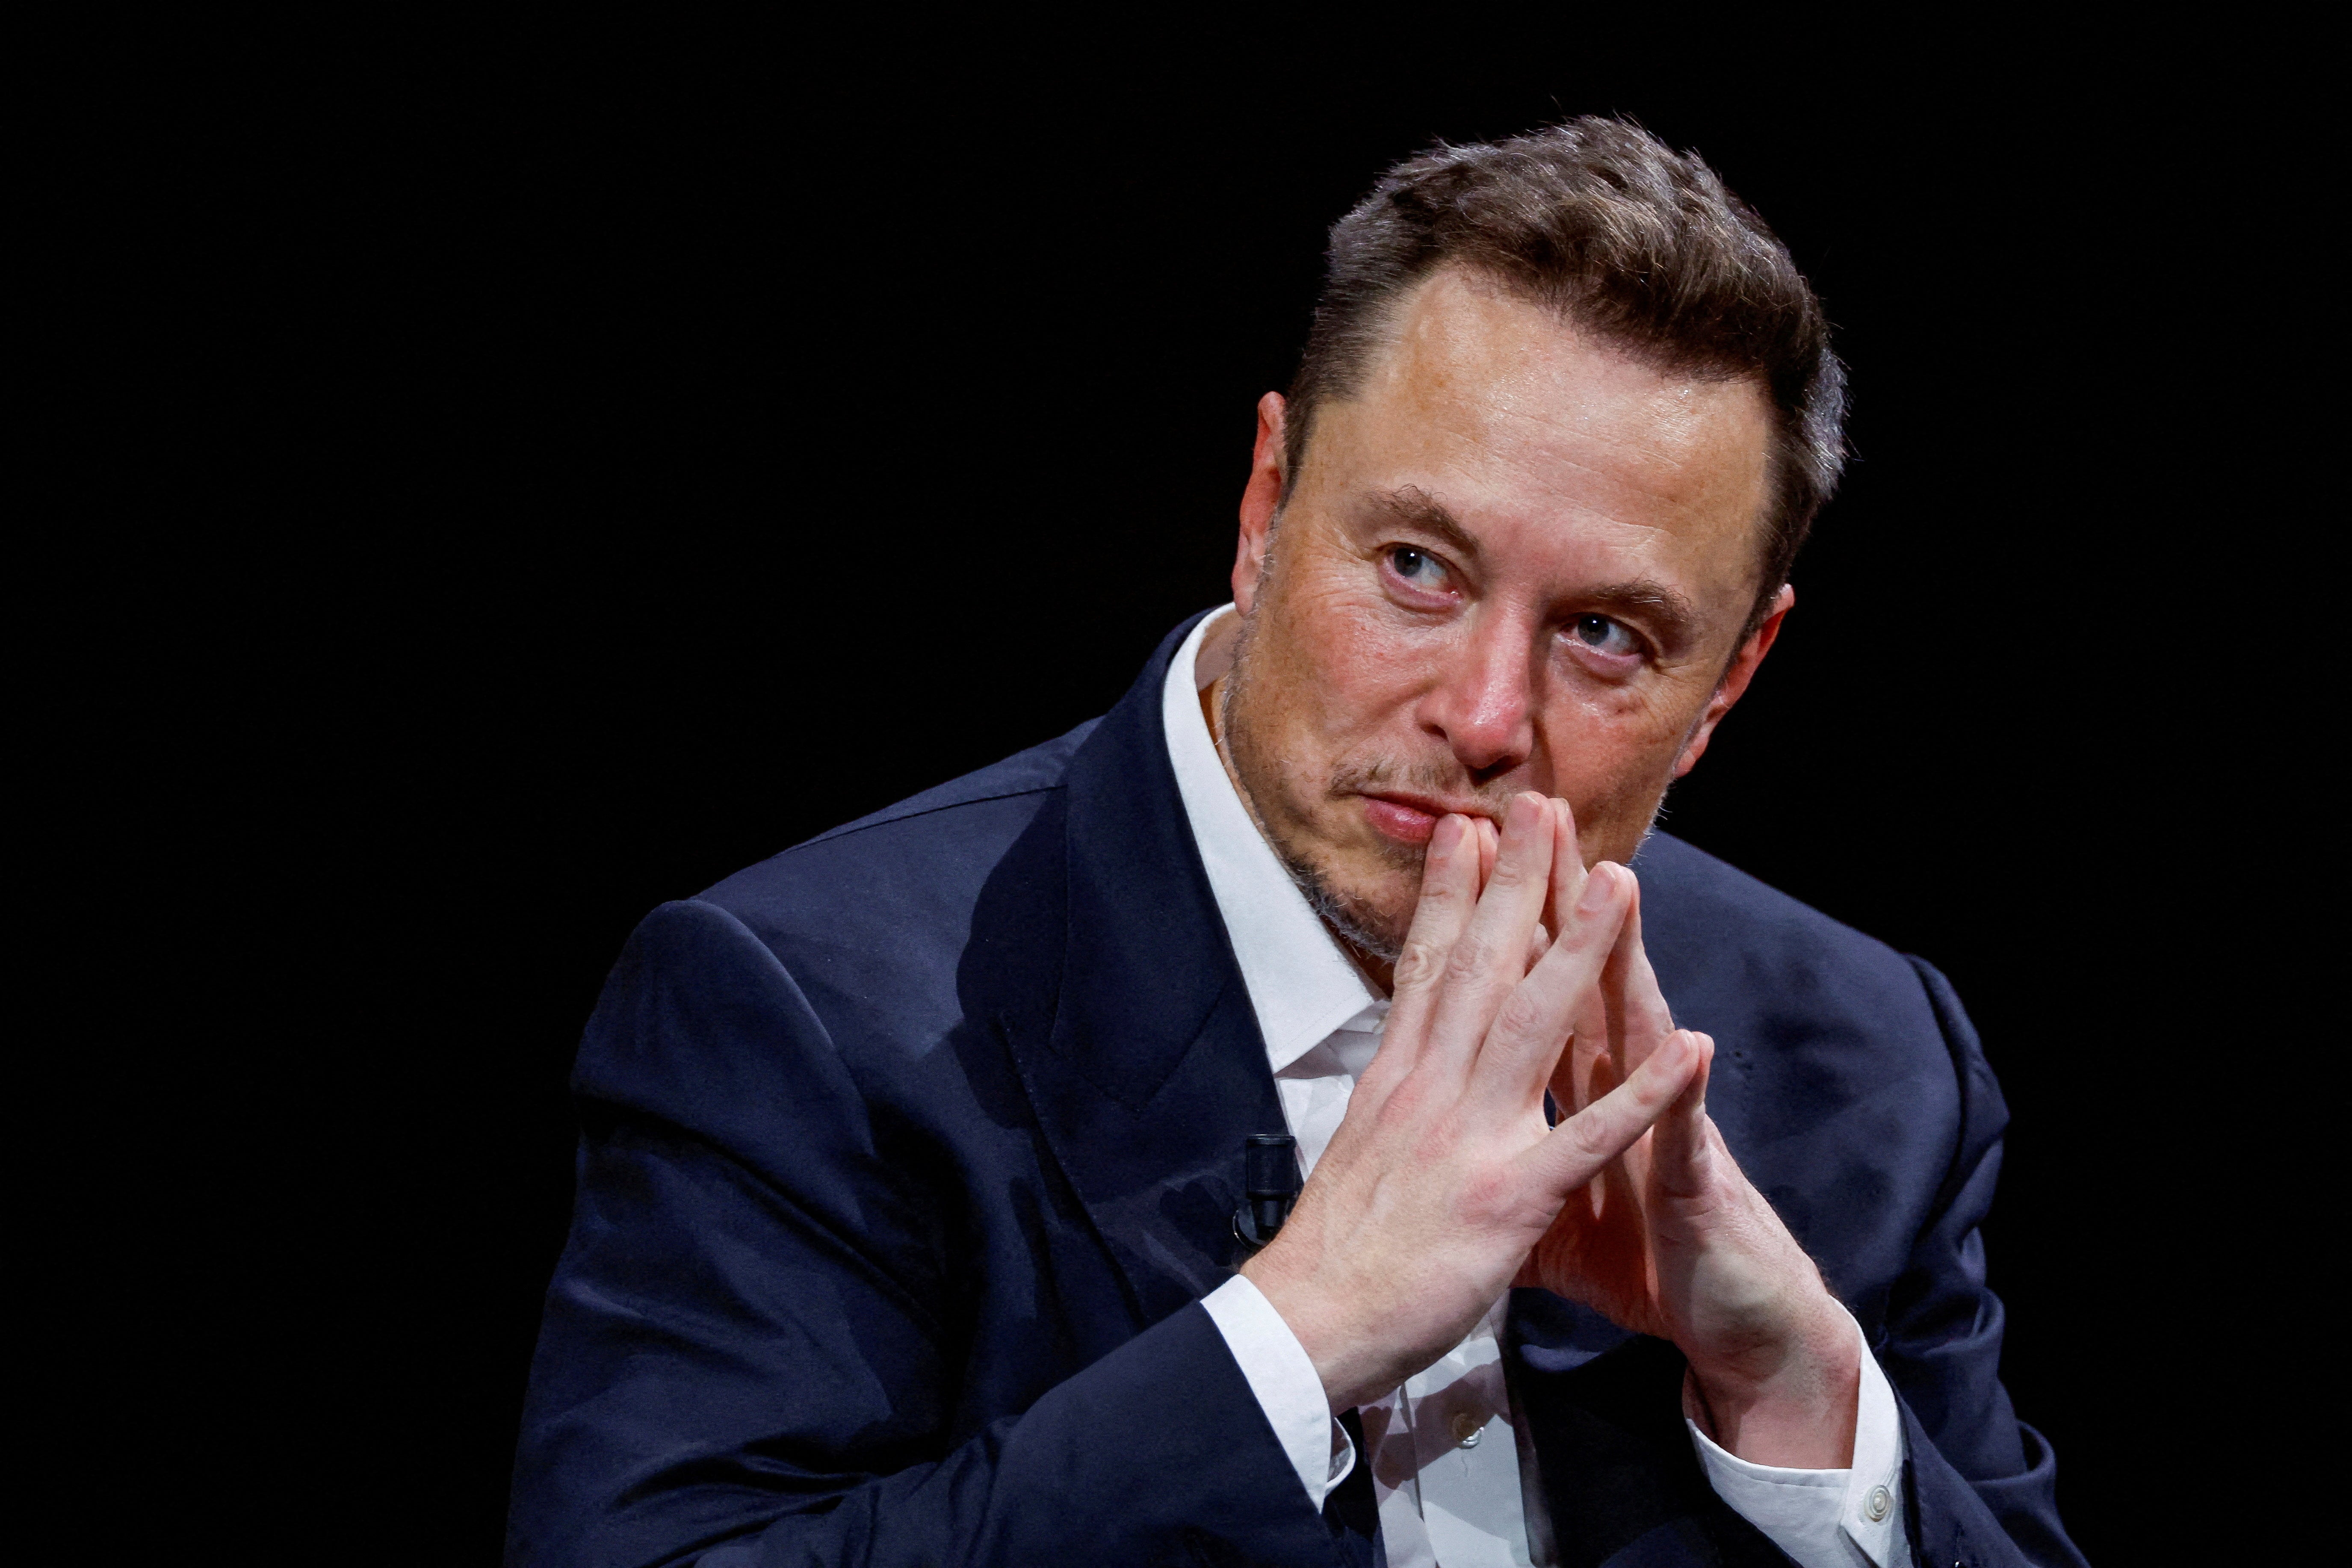 Elon Musk has said he plans to sue the ADL for defamation